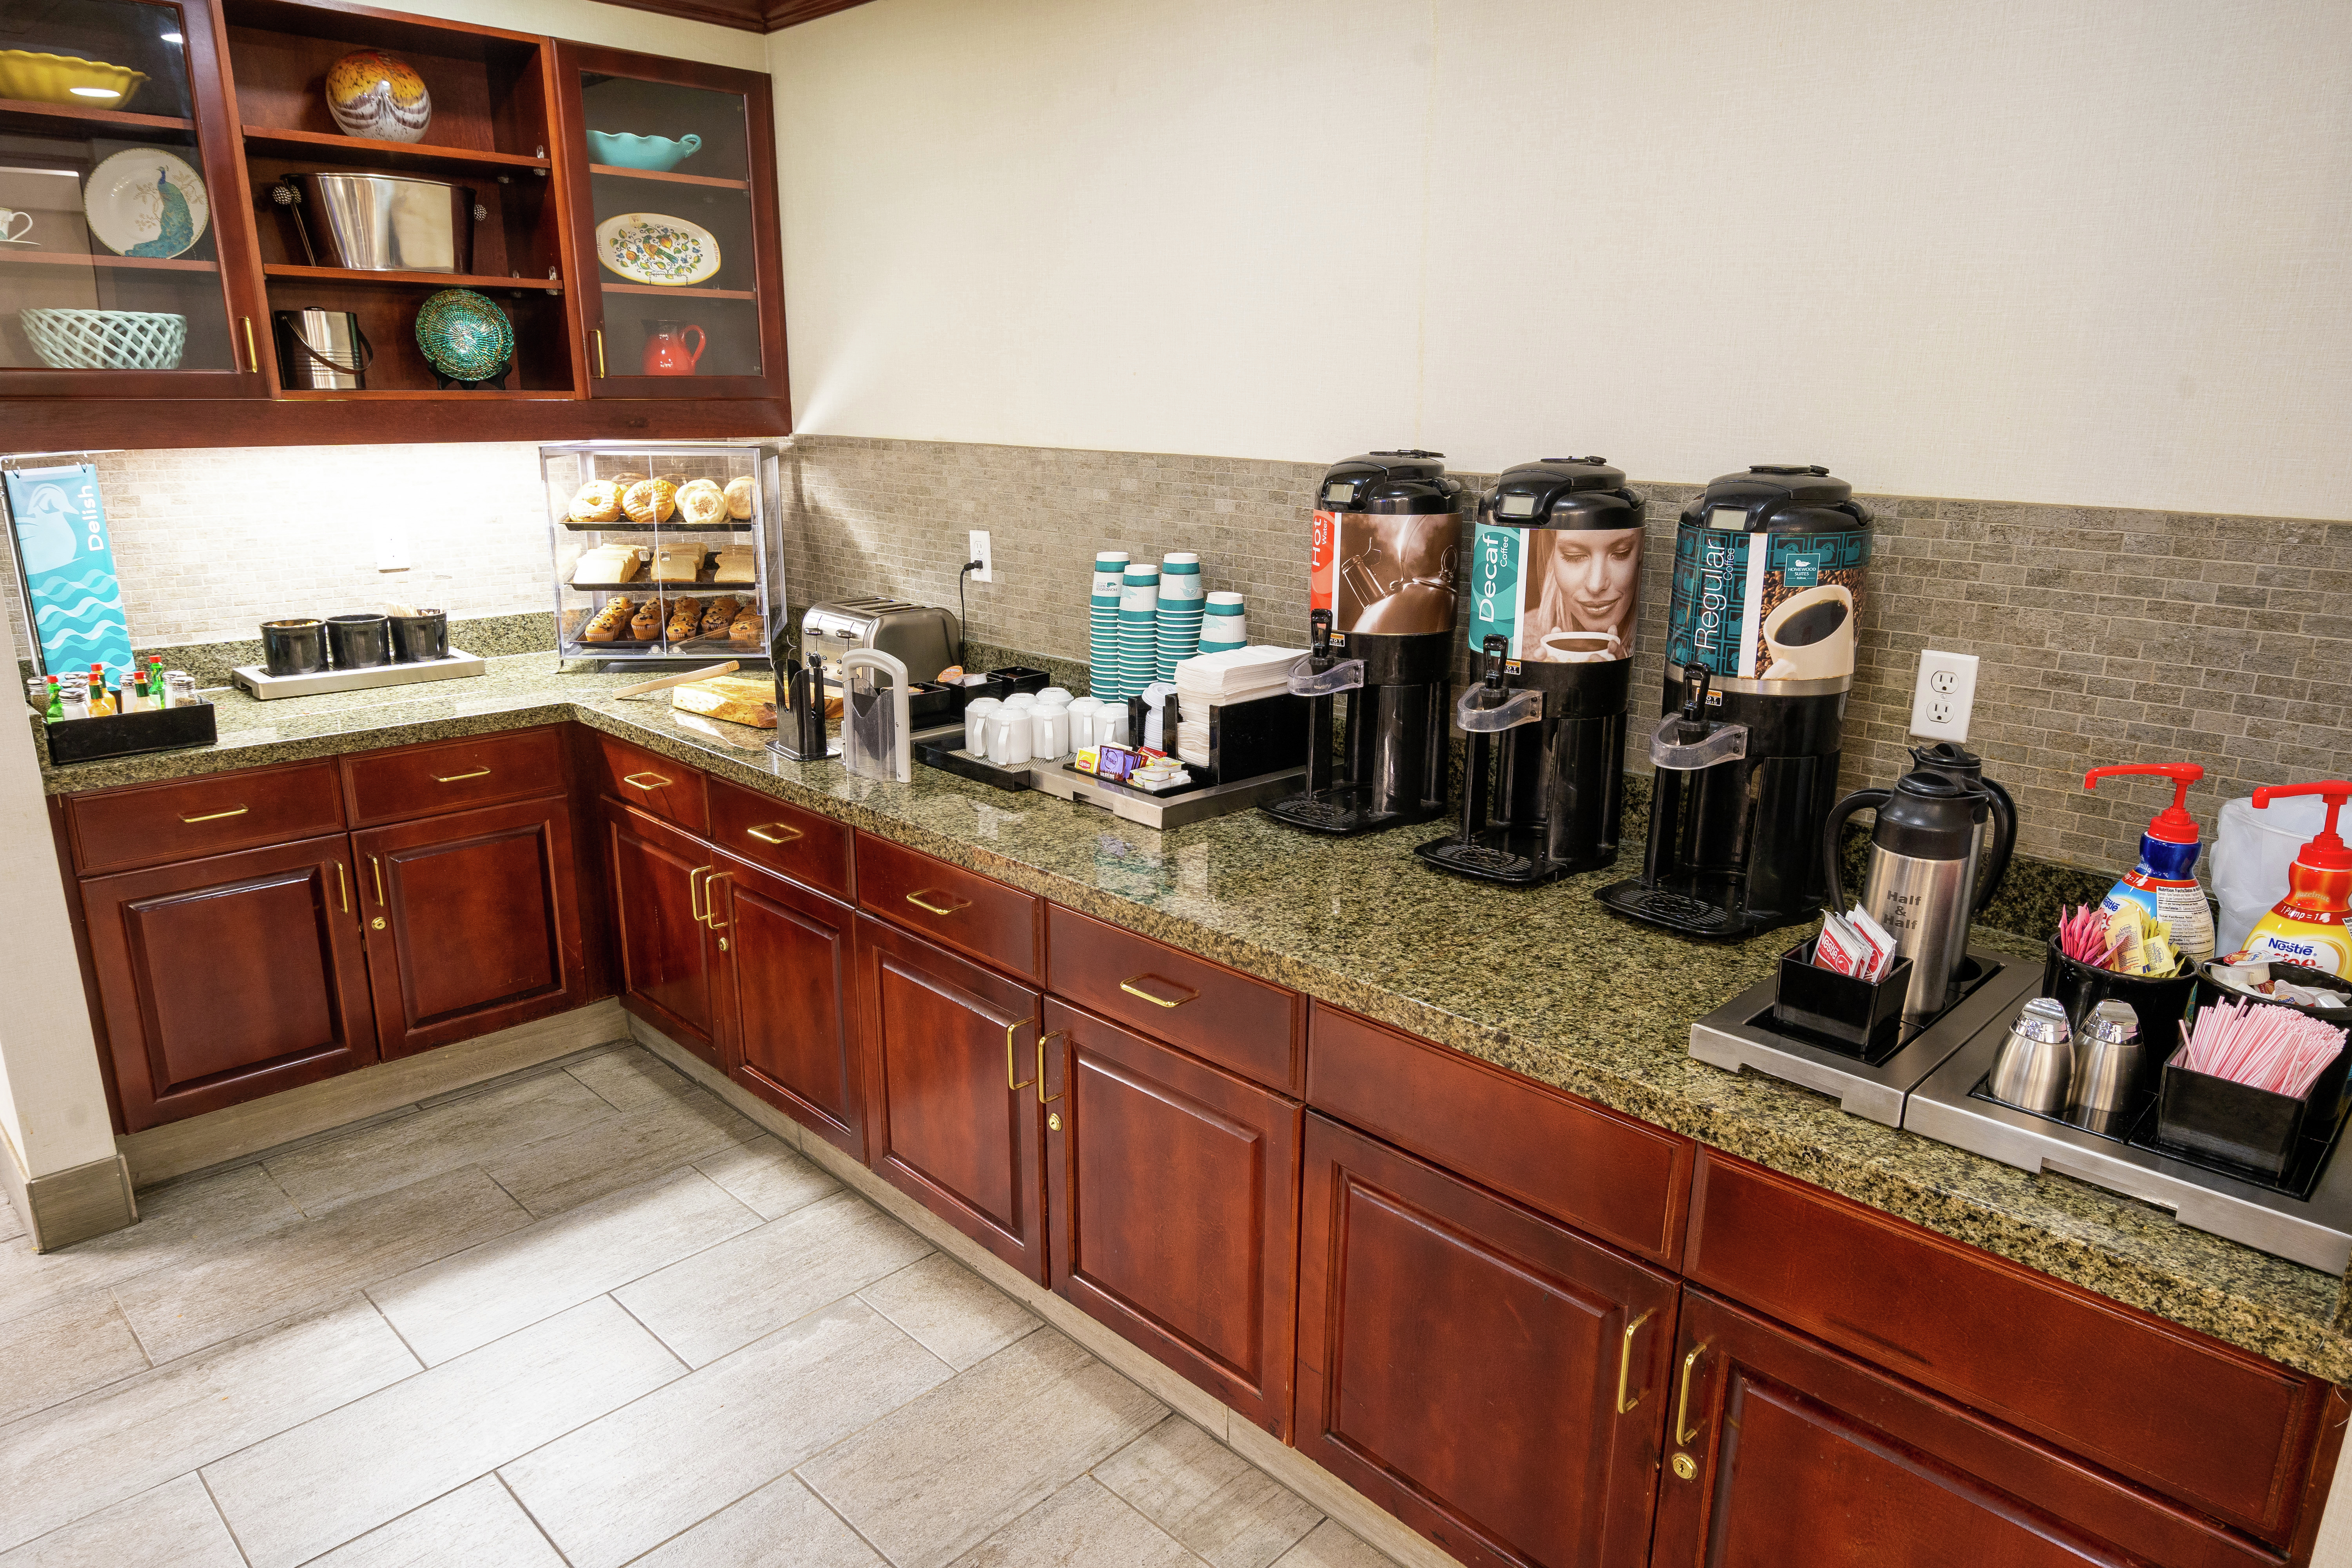 Continental Breakfast Area with Coffee